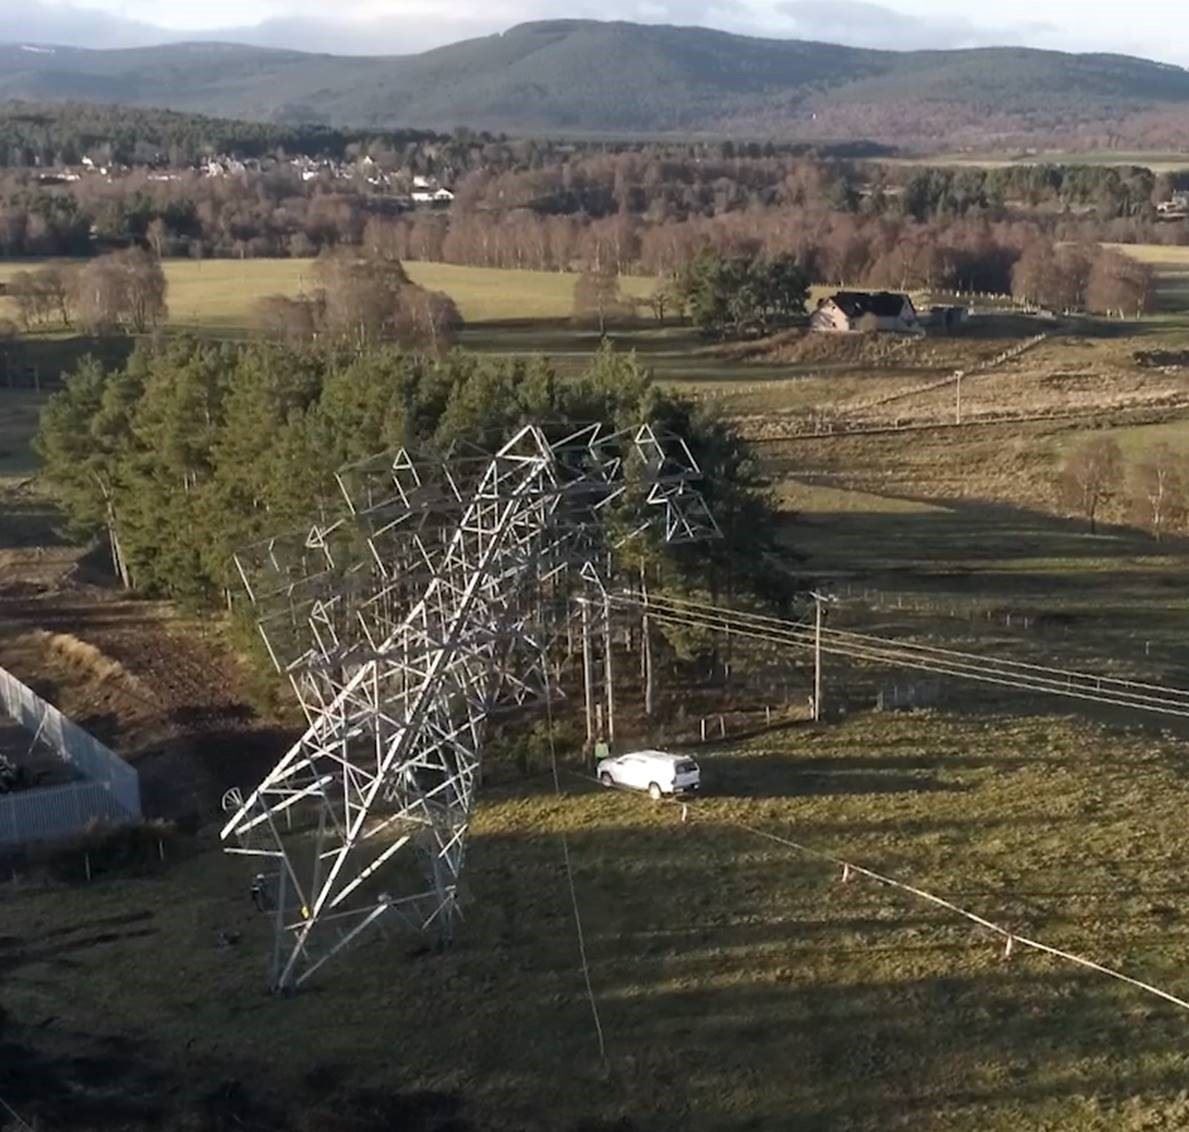 The final pylon comes crashing down to mark the end of the big money project in Strathspey.